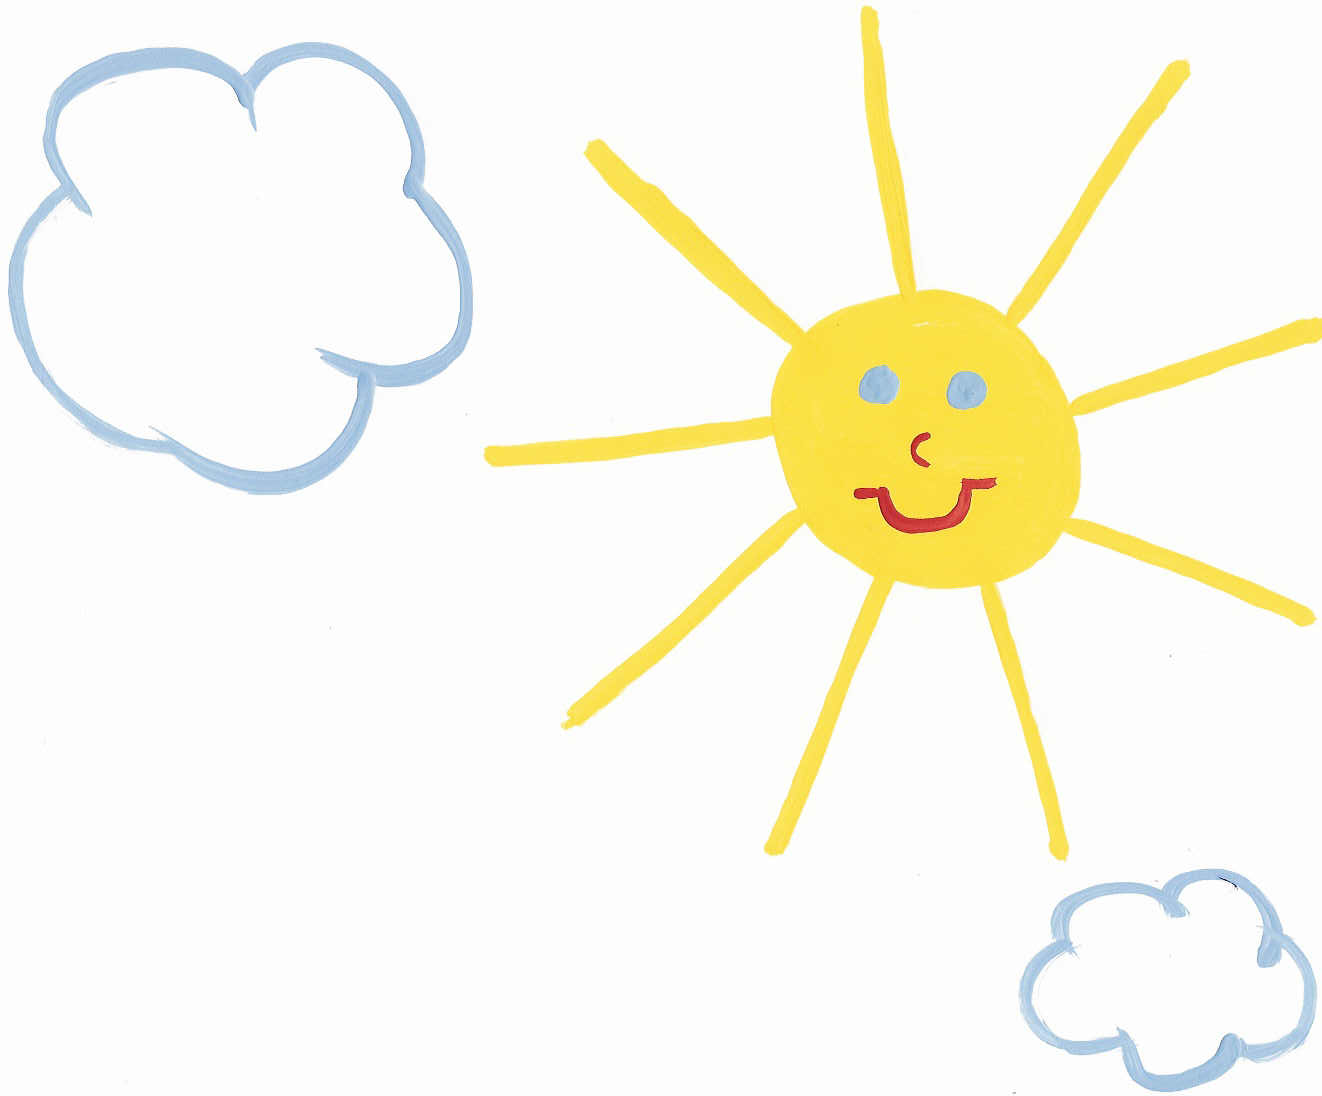 Free Beautiful Day Cliparts, Download Free Clip Art, Free Clip Art.